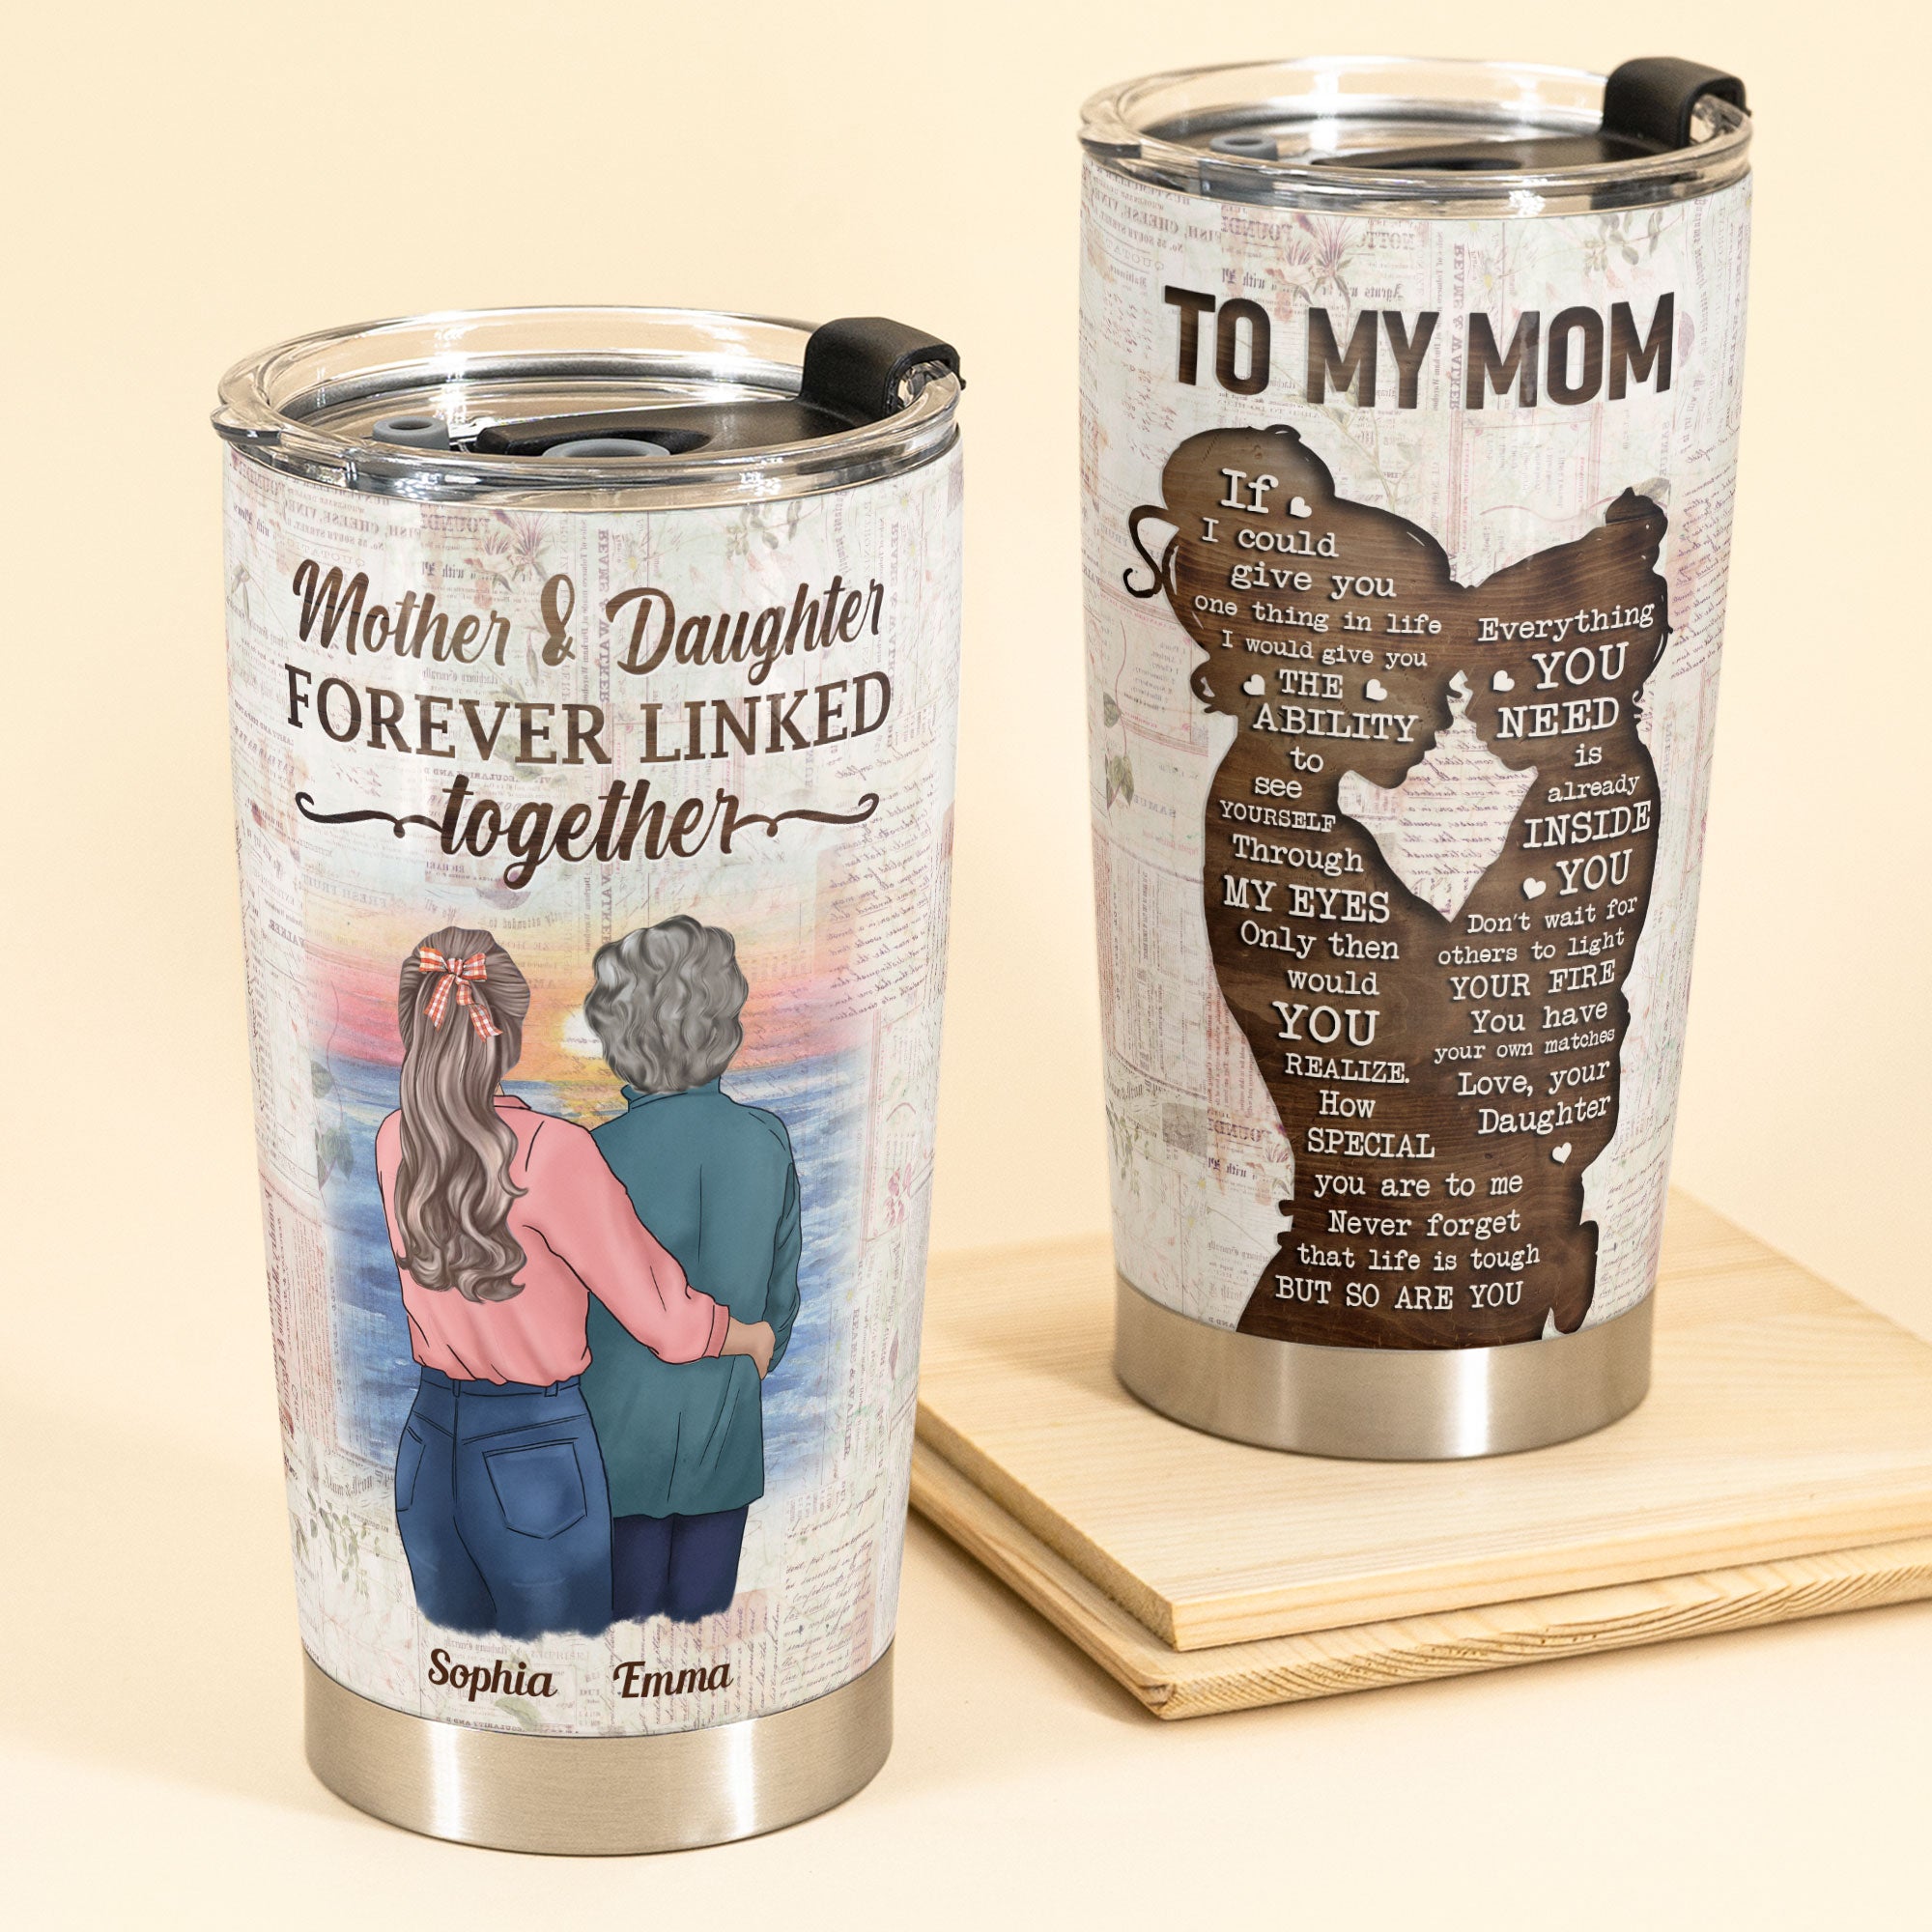 Mother And Daughters Forever Linked Together - Personalized Tumbler Cu –  Macorner